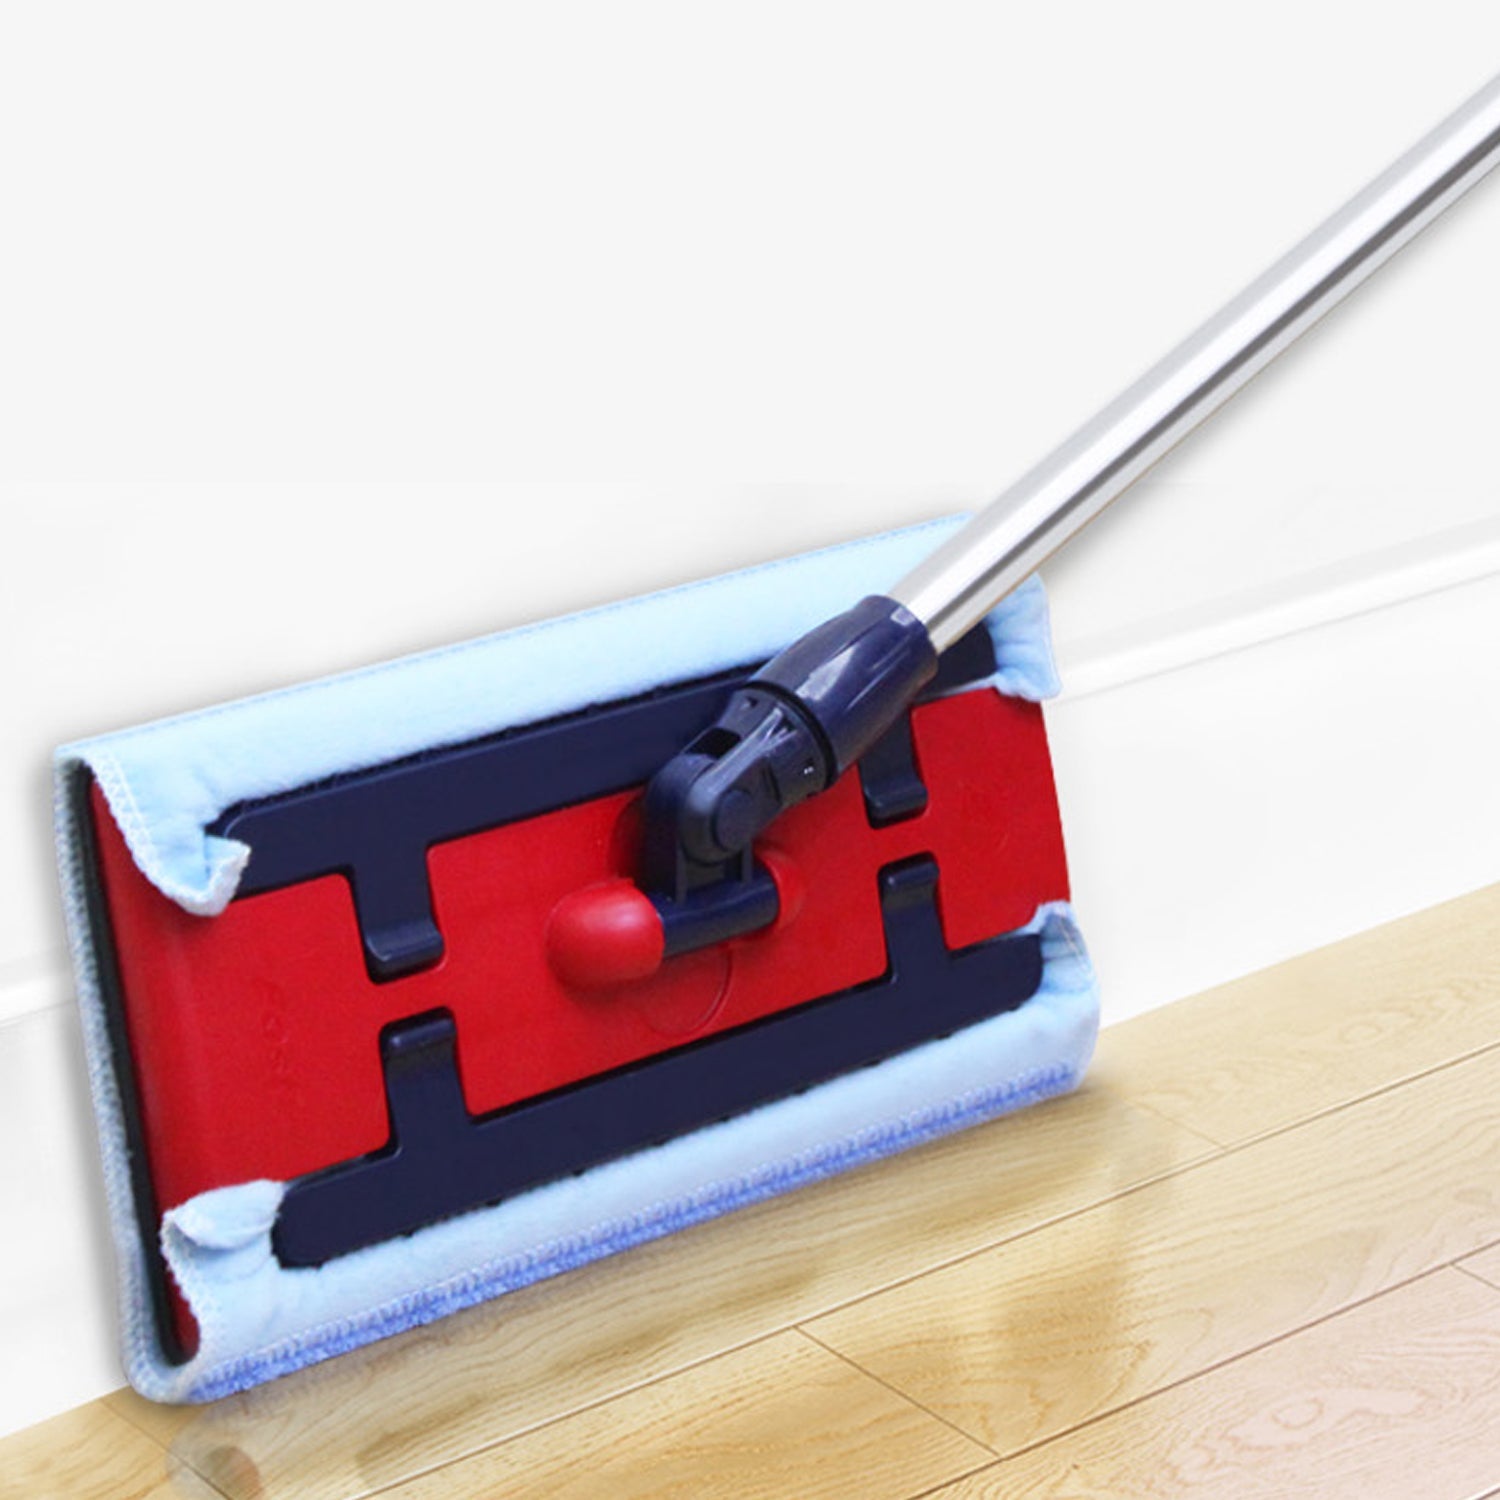 Mop for Floor Cleaning, Microfiber Mop, Flat Mop, Rotating Mop for Floor Cleaning